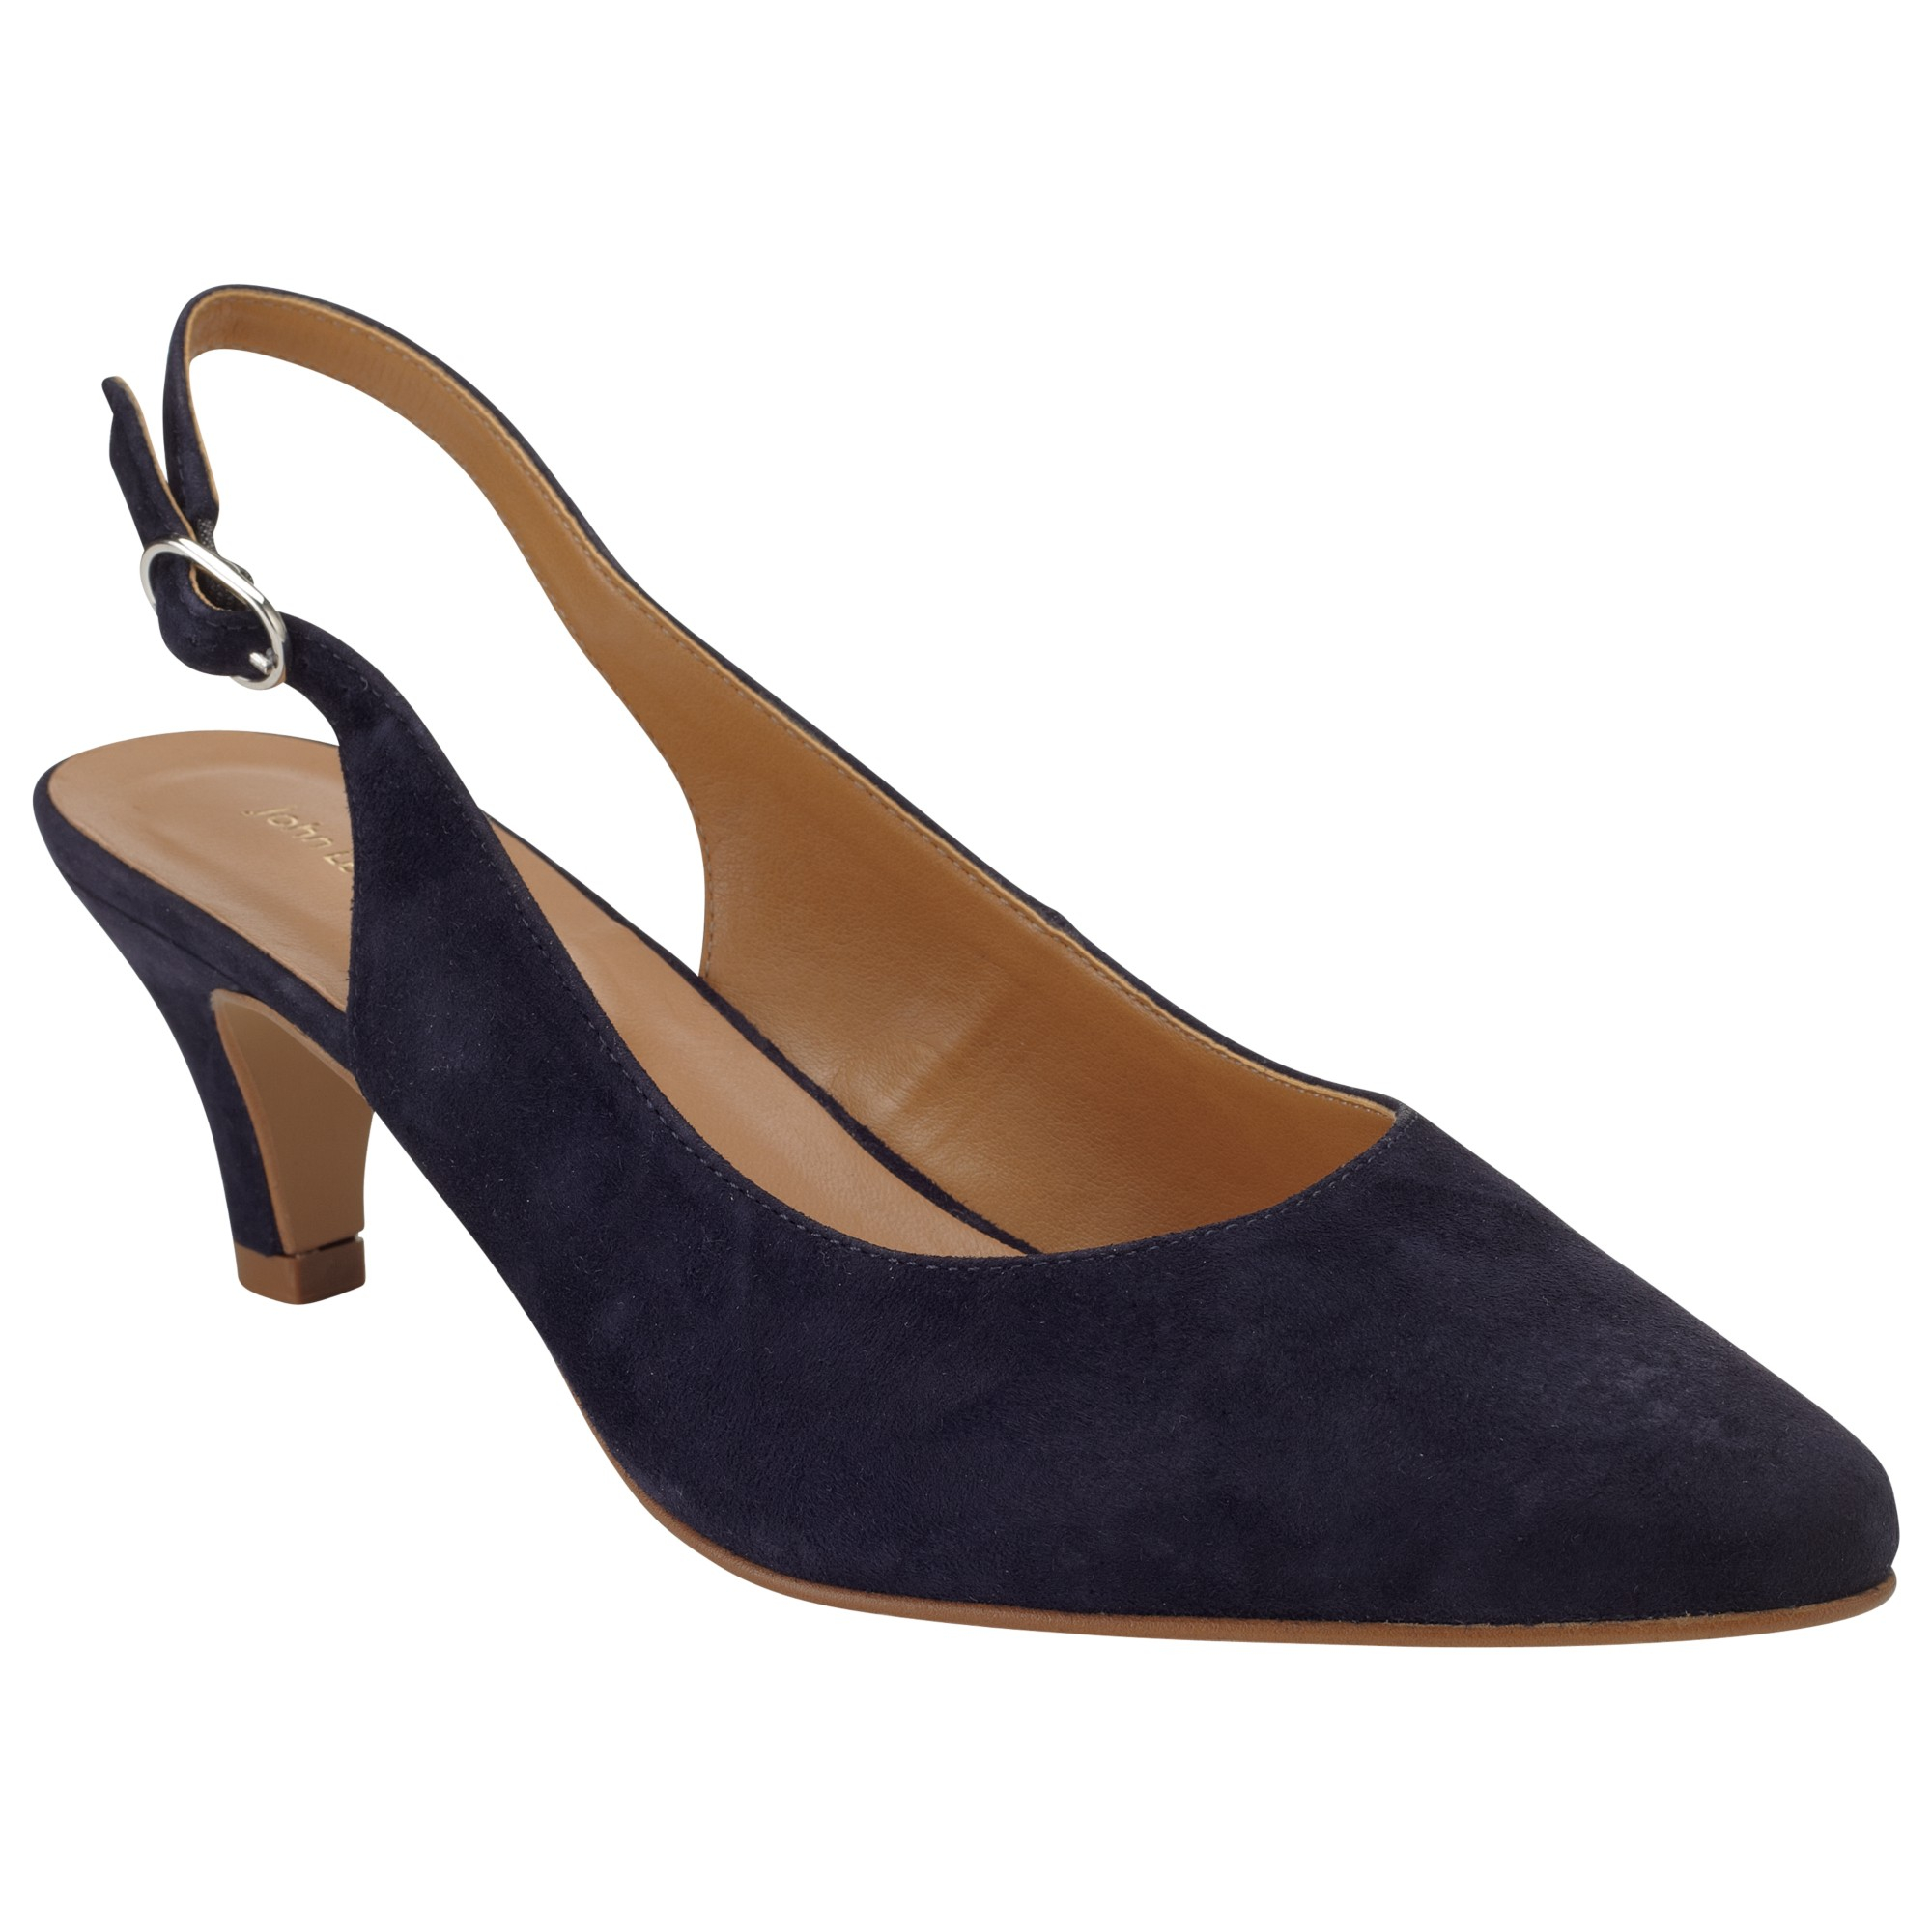 John Lewis Grace Suede Court Shoes in Blue (navy)